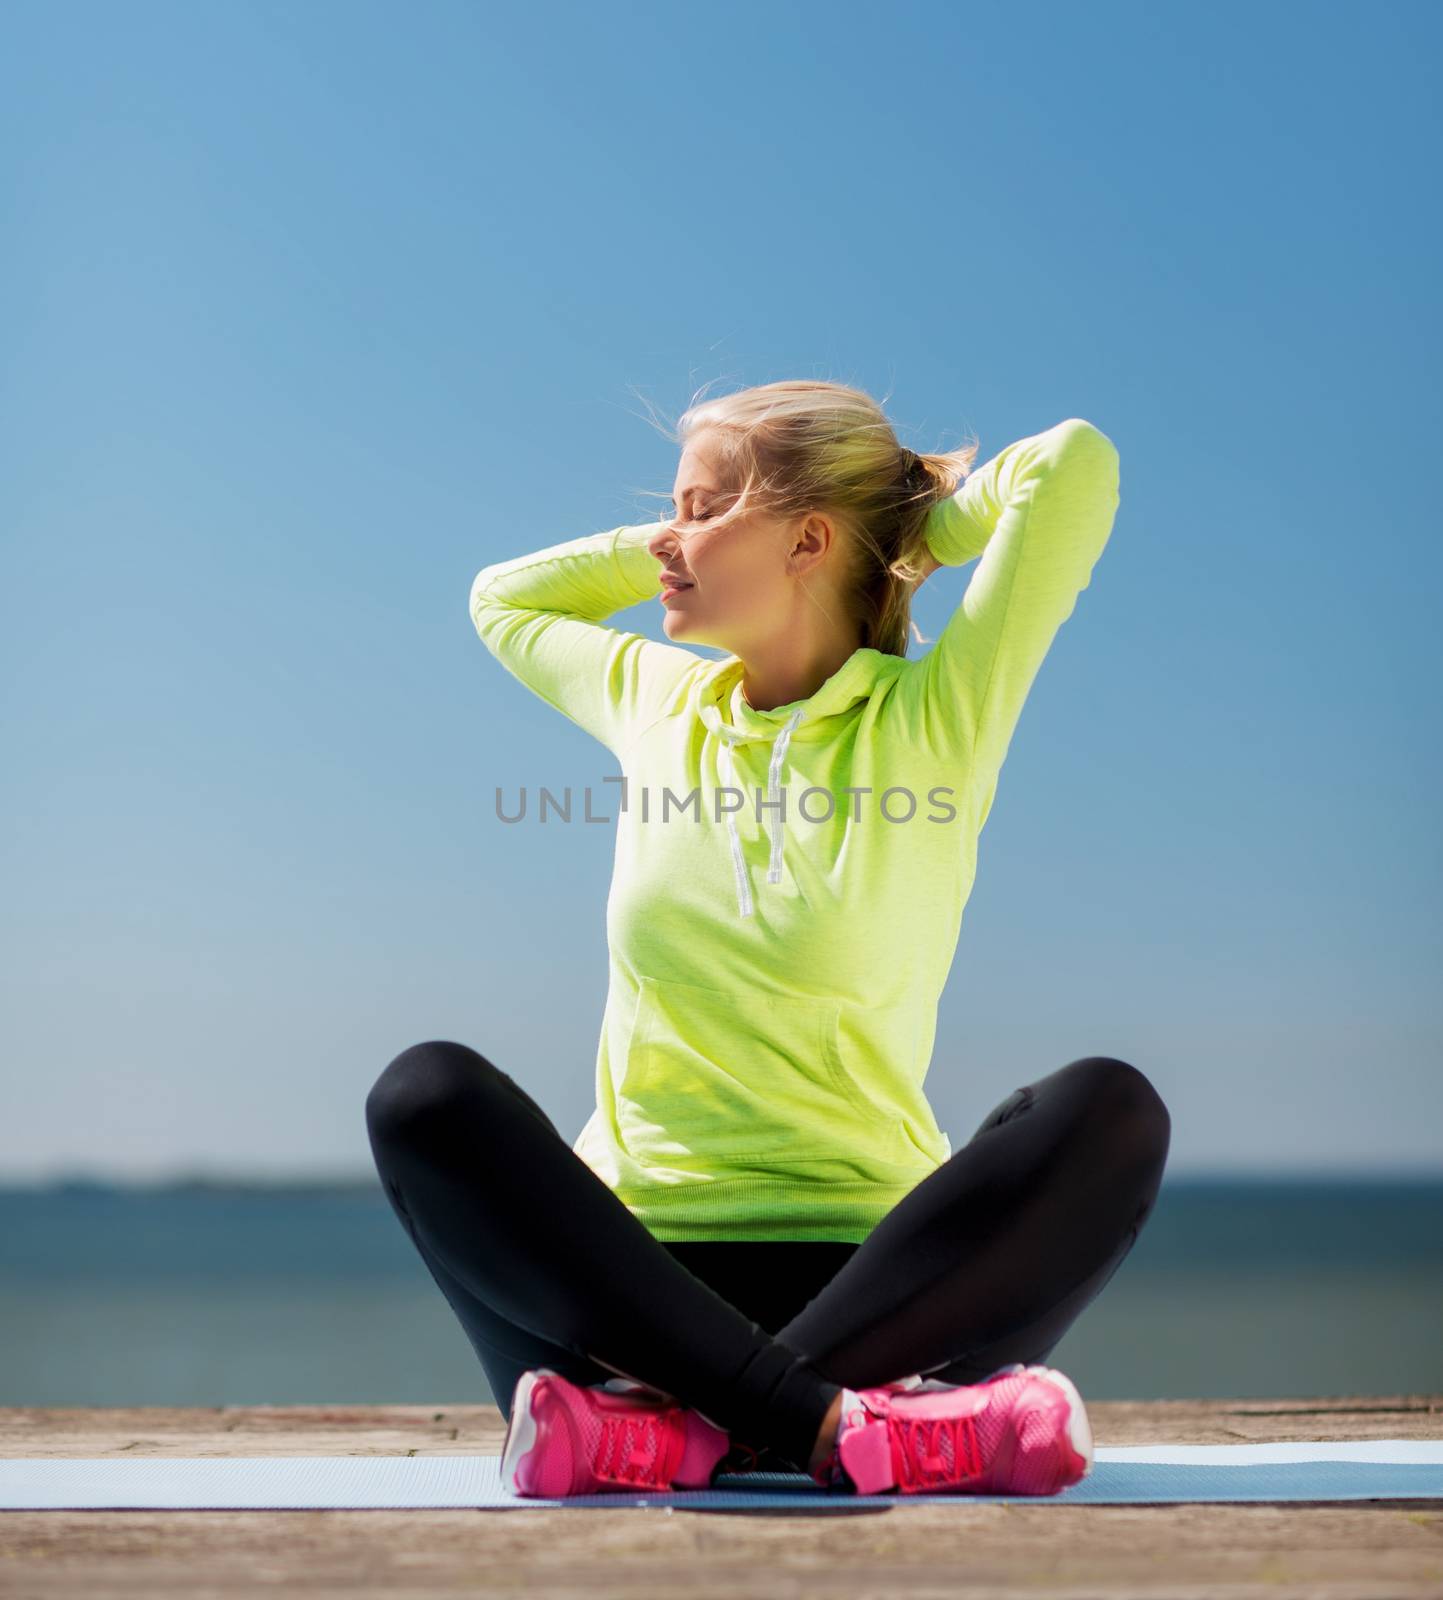 sport and lifestyle concept - woman doing yoga outdoors